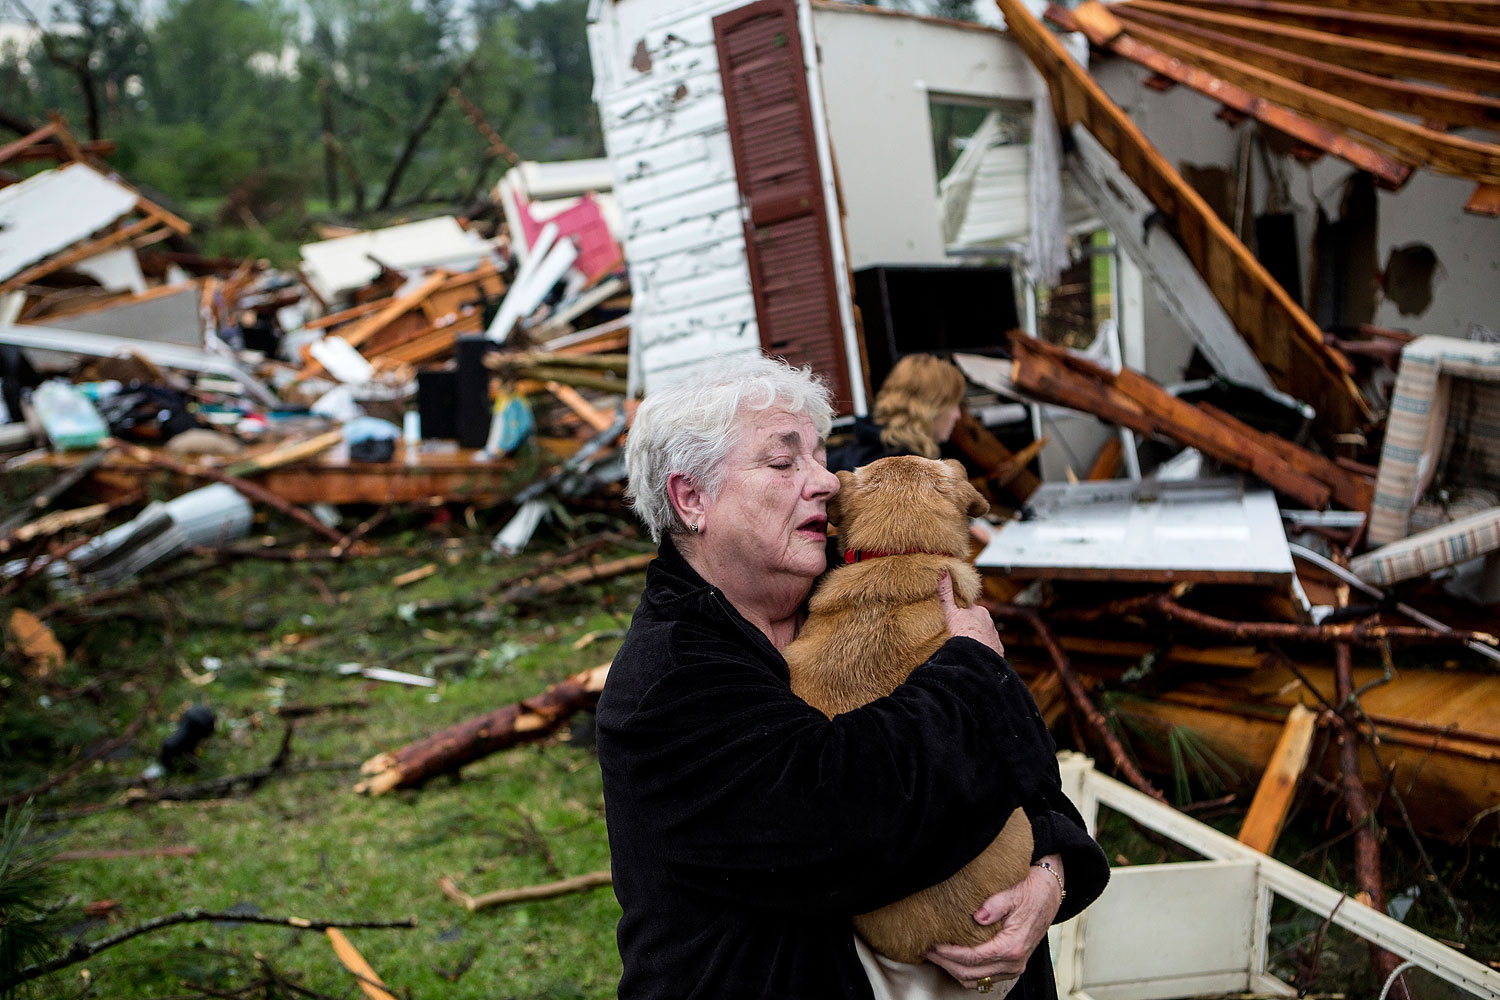 Constance Lambert embraces her dog after finding it alive when returning to her destroyed home in Tupelo, Miss., April 28, 2014.